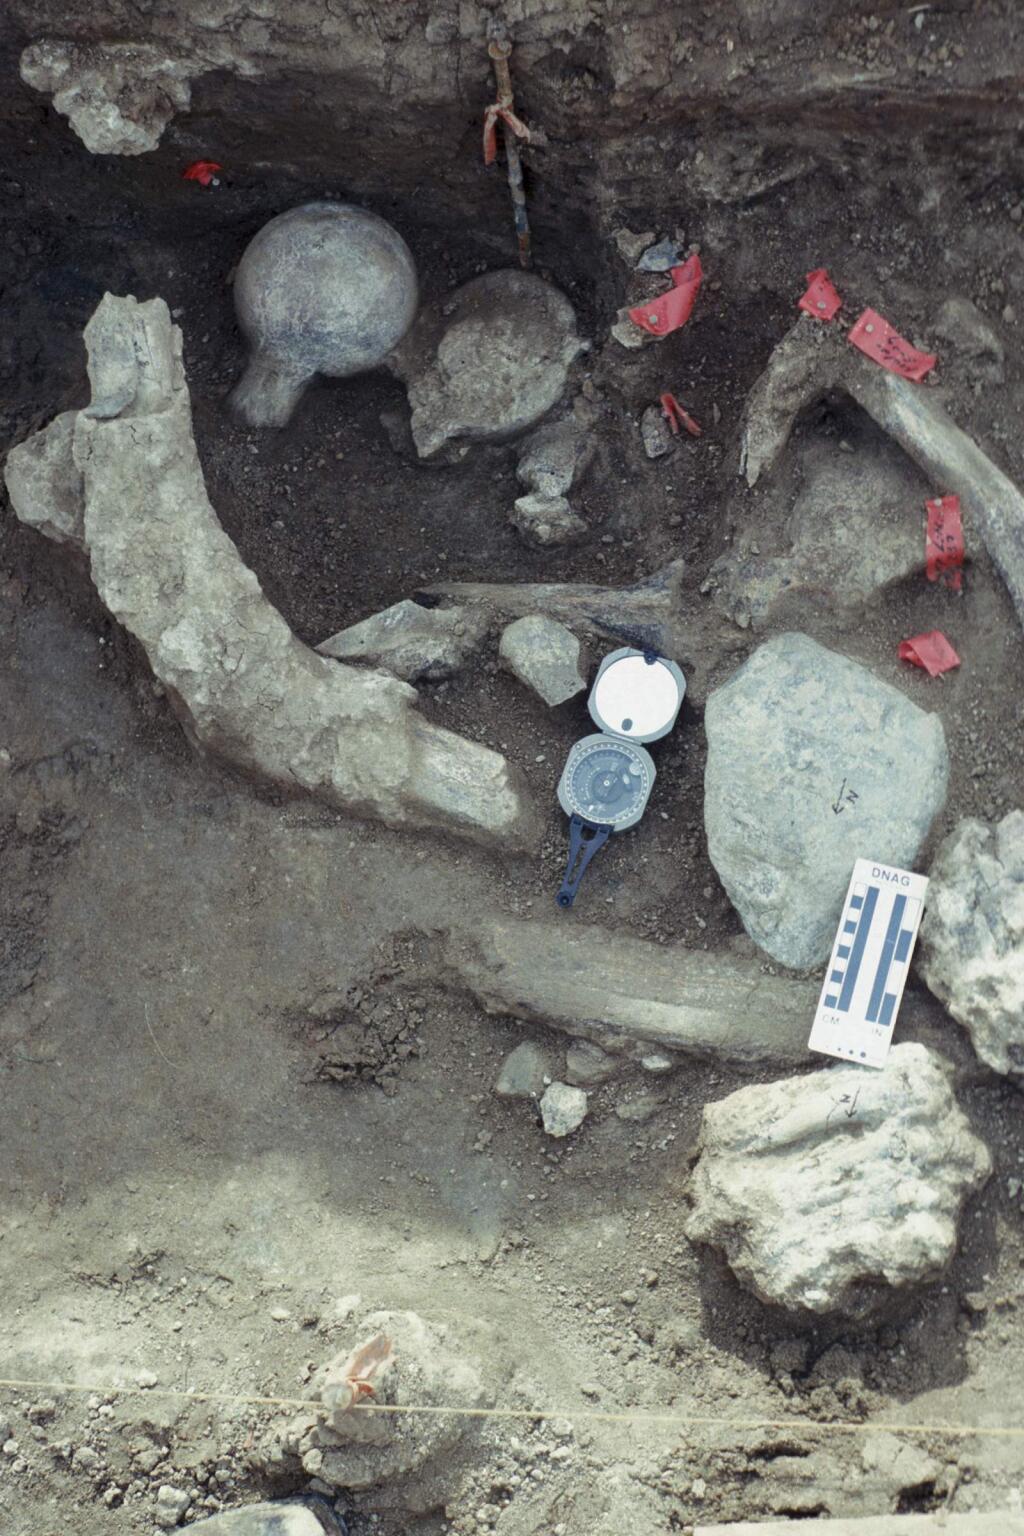 This Jan. 25, 1993 photo provided by the San Diego Natural History Museum shows a concentration of fossil bone and rock at an excavation site in San Diego, Calif. The positions of the femur heads, one up and one down, broken in the same manner next to each other is unusual. Mastodon molars are located in the lower right hand corner next to a large rock comprised of andesite which is in contact with a broken vertebra. At upper left is a rib angled upwards resting on a rock fragment. (San Diego Natural History Museum via AP)